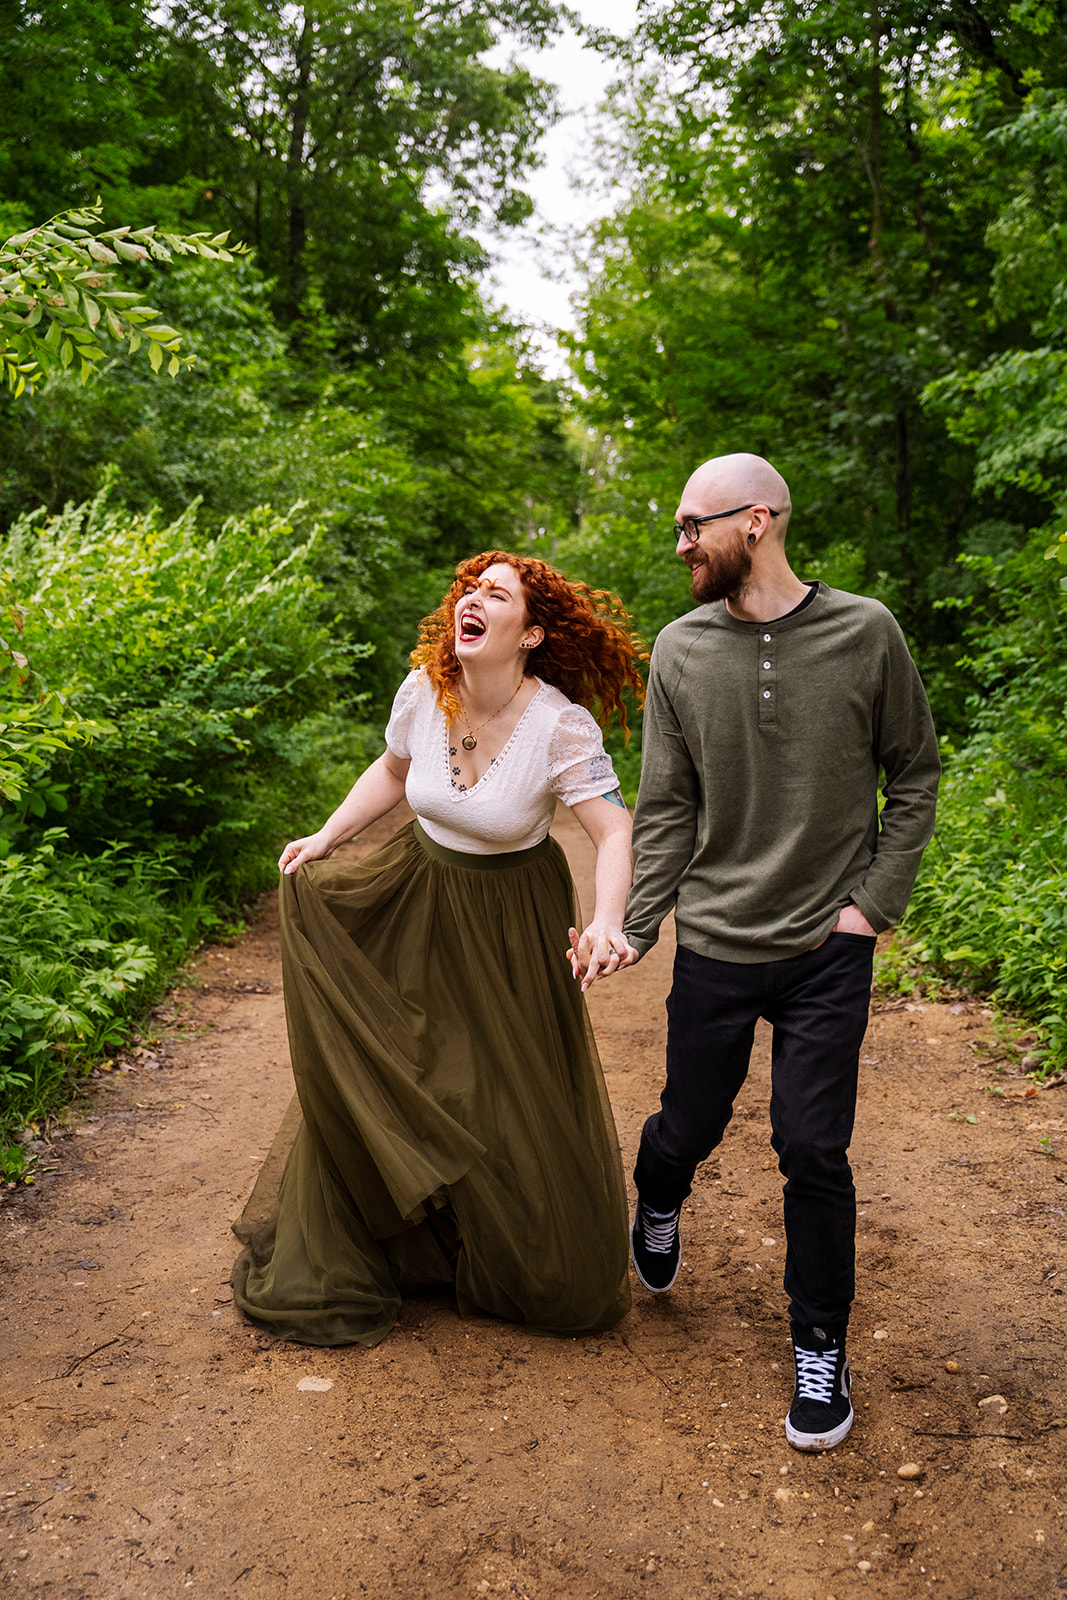 Fun candid photo during an engagement session in Waukesha Wisconsin